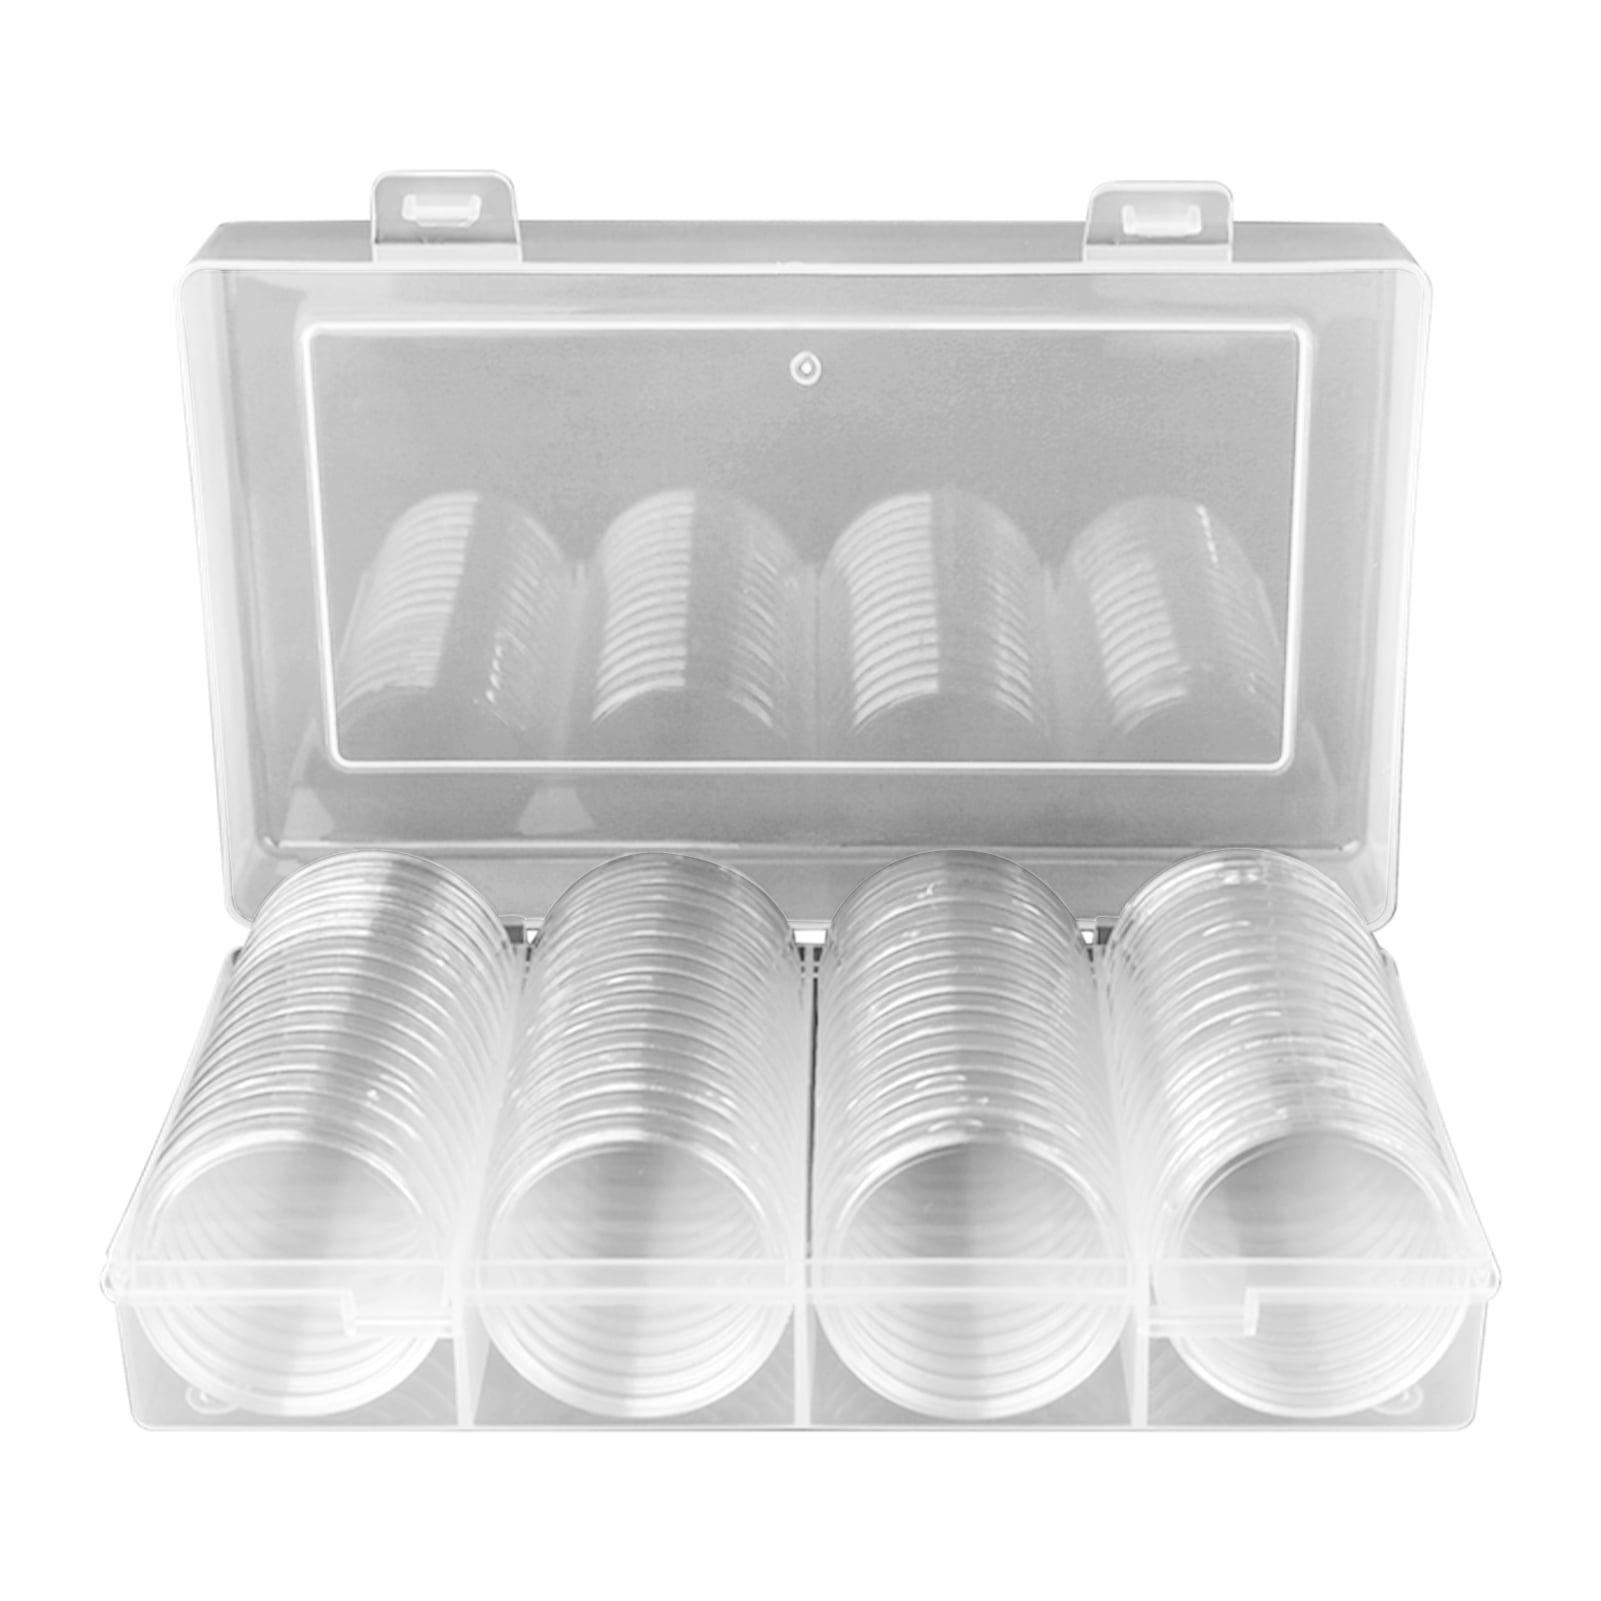 5x Coin Capsule Collection Box Protective Display Case Storage Organizer Holder